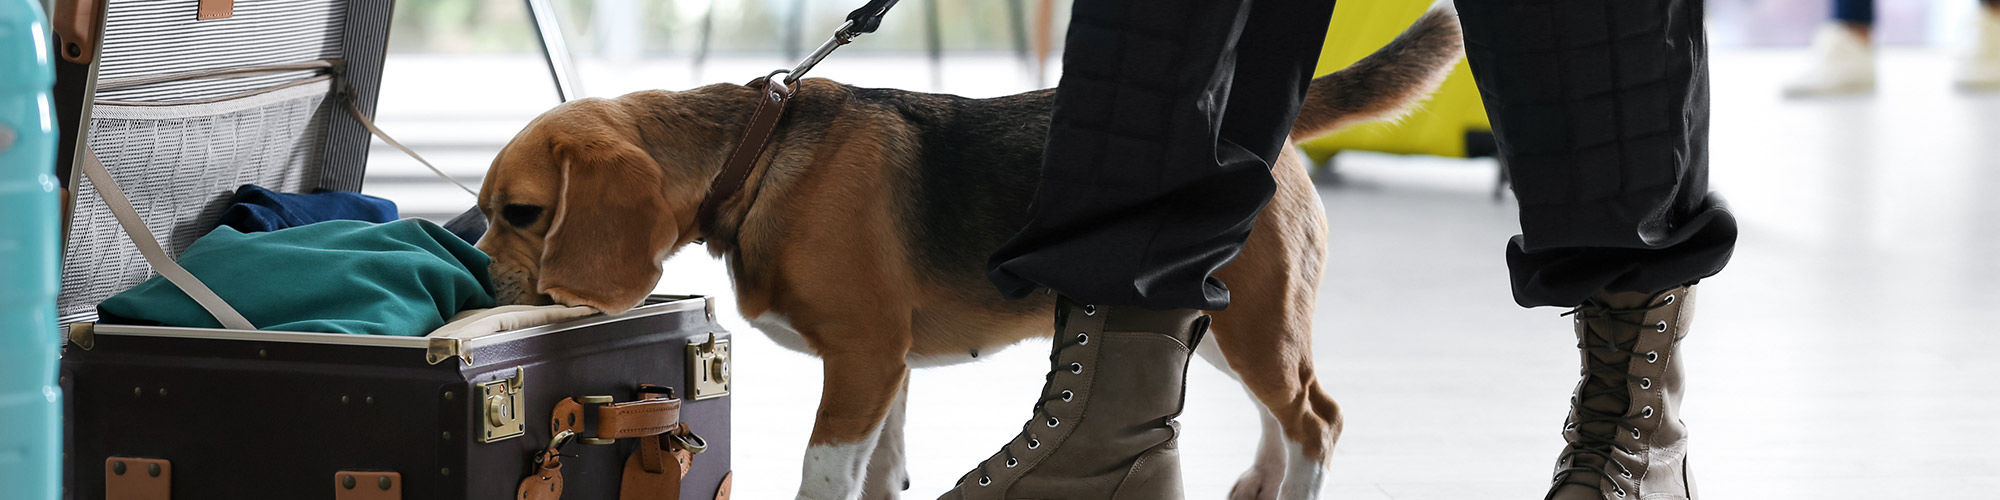 SOKKS K9 : Scent and detection for Working dog, police, army (explosive, drugs, ivoiry...)